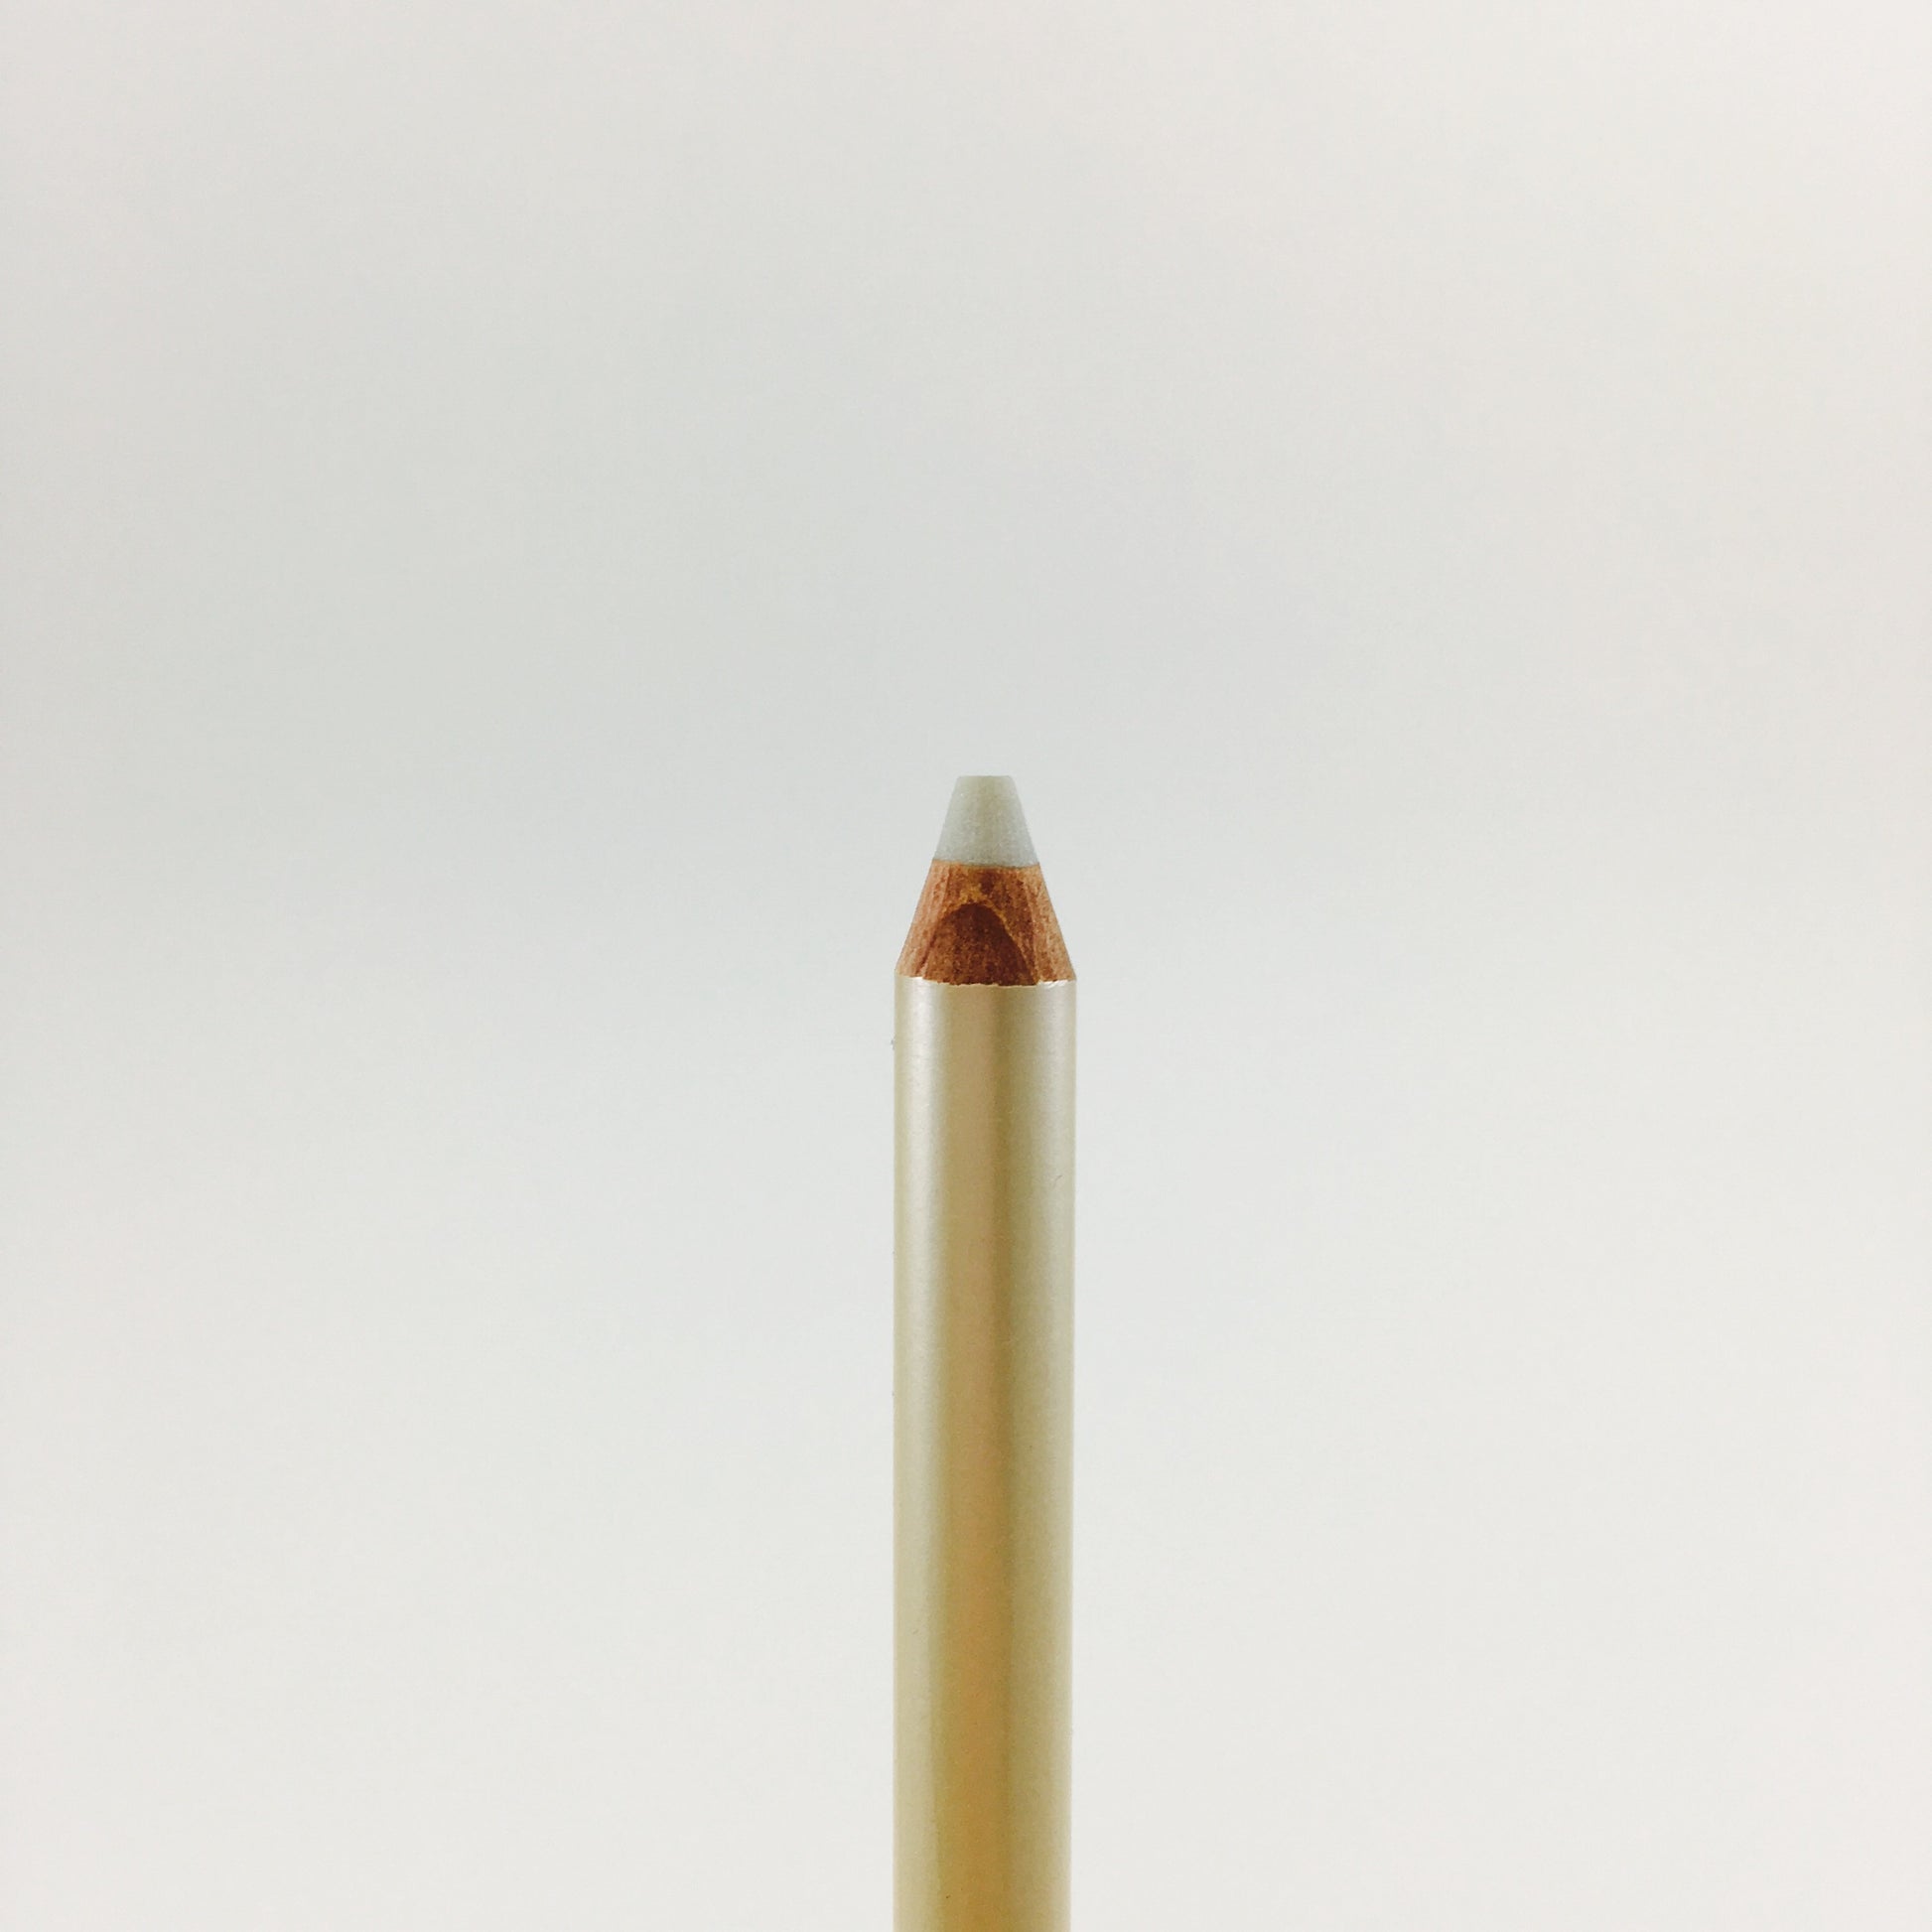 Castell Eraser Pencil With Brush